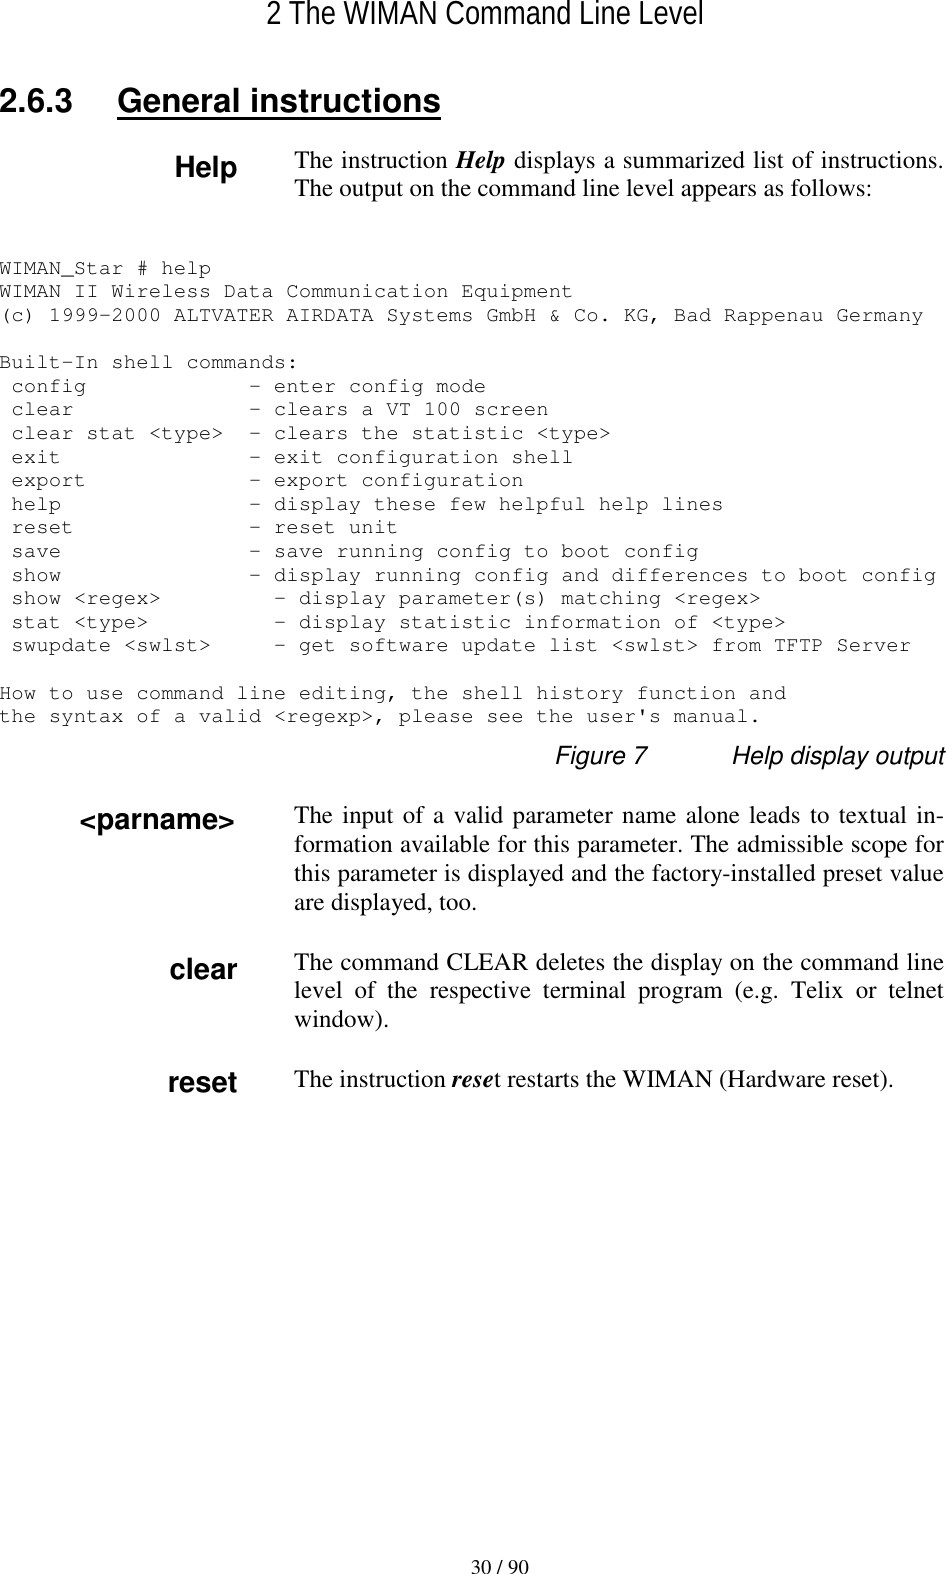   2 The WIMAN Command Line Level 30 / 90 2.6.3 General instructions The instruction Help displays a summarized list of instructions. The output on the command line level appears as follows:  WIMAN_Star # help WIMAN II Wireless Data Communication Equipment (c) 1999-2000 ALTVATER AIRDATA Systems GmbH &amp; Co. KG, Bad Rappenau Germany  Built-In shell commands:  config             - enter config mode  clear              - clears a VT 100 screen  clear stat &lt;type&gt;  - clears the statistic &lt;type&gt;  exit               - exit configuration shell  export             - export configuration  help               - display these few helpful help lines  reset              - reset unit  save               - save running config to boot config  show               - display running config and differences to boot config  show &lt;regex&gt;         - display parameter(s) matching &lt;regex&gt;  stat &lt;type&gt;          - display statistic information of &lt;type&gt;  swupdate &lt;swlst&gt;     - get software update list &lt;swlst&gt; from TFTP Server  How to use command line editing, the shell history function and the syntax of a valid &lt;regexp&gt;, please see the user&apos;s manual. Figure 7  Help display output The input of a valid parameter name alone leads to textual in-formation available for this parameter. The admissible scope for this parameter is displayed and the factory-installed preset value are displayed, too. The command CLEAR deletes the display on the command line level of the respective terminal program (e.g. Telix or telnet window). The instruction reset restarts the WIMAN (Hardware reset).  &lt;parname&gt; reset Help clear 